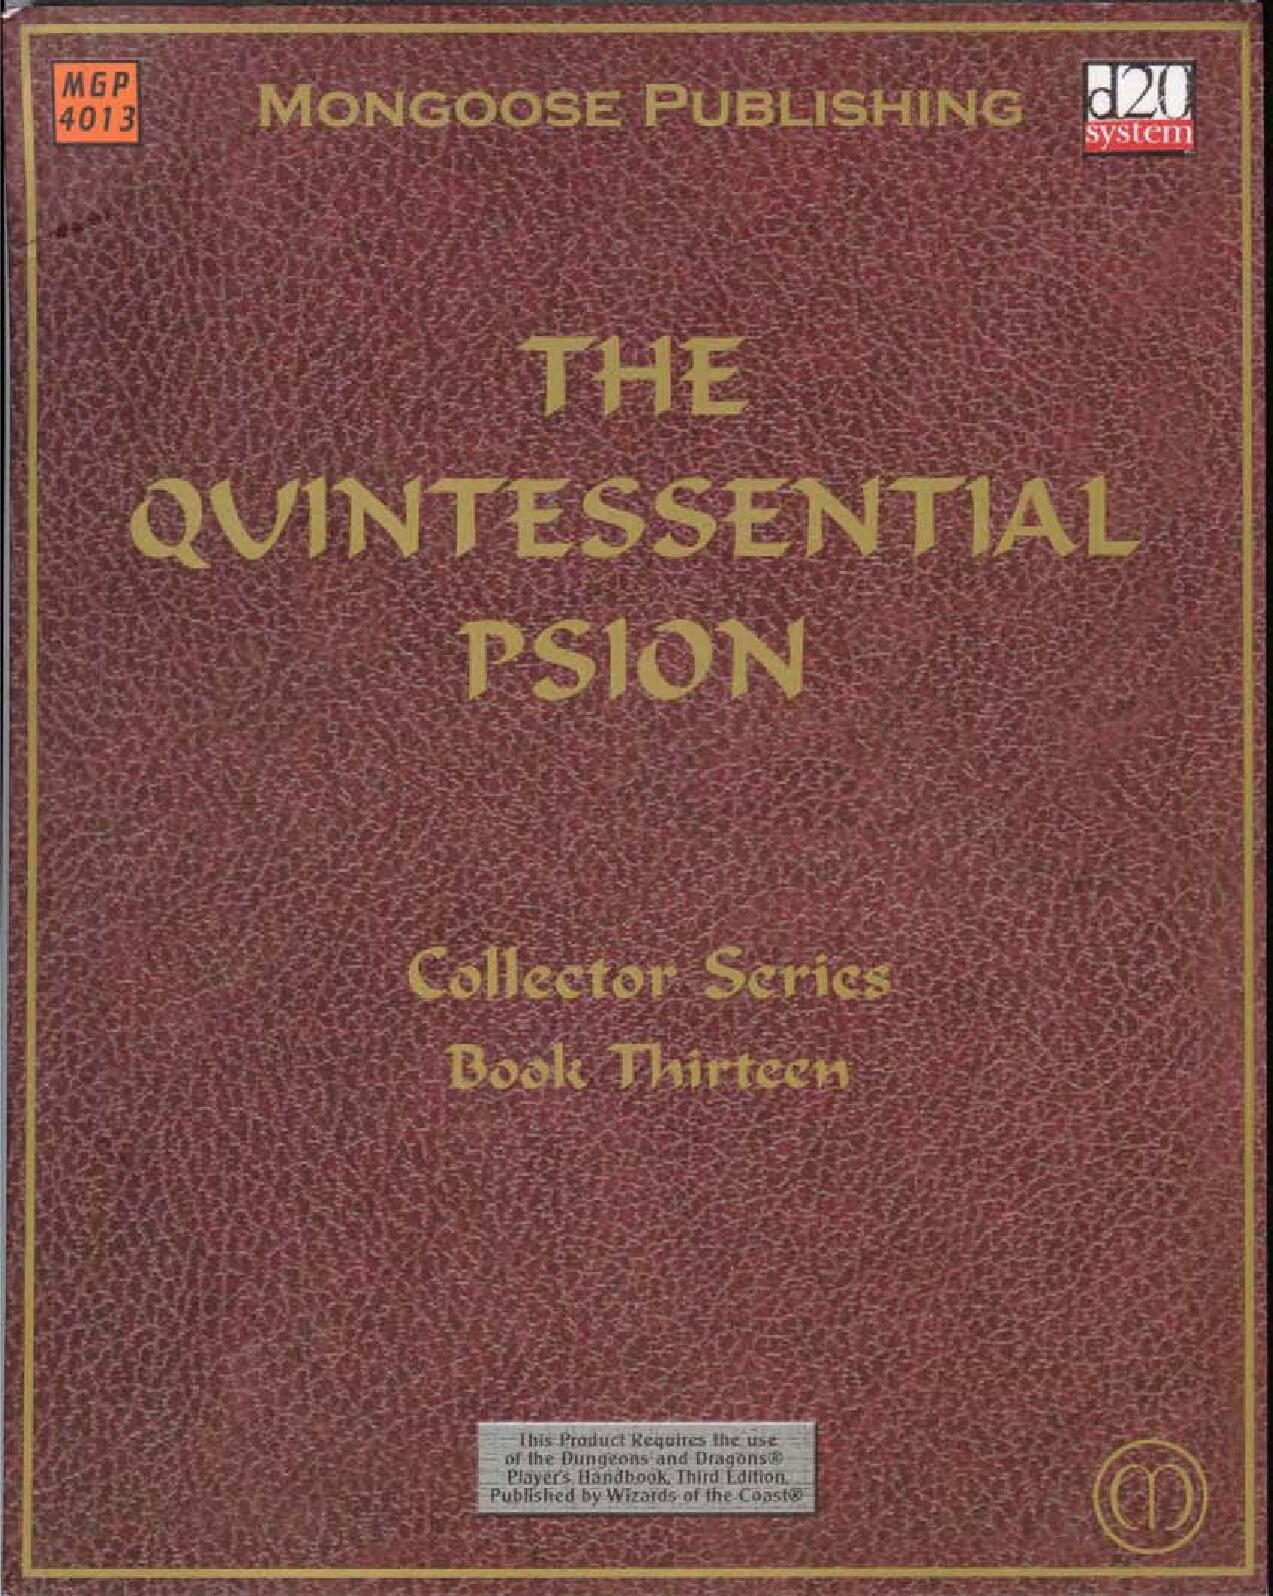 The Quintessential Psion